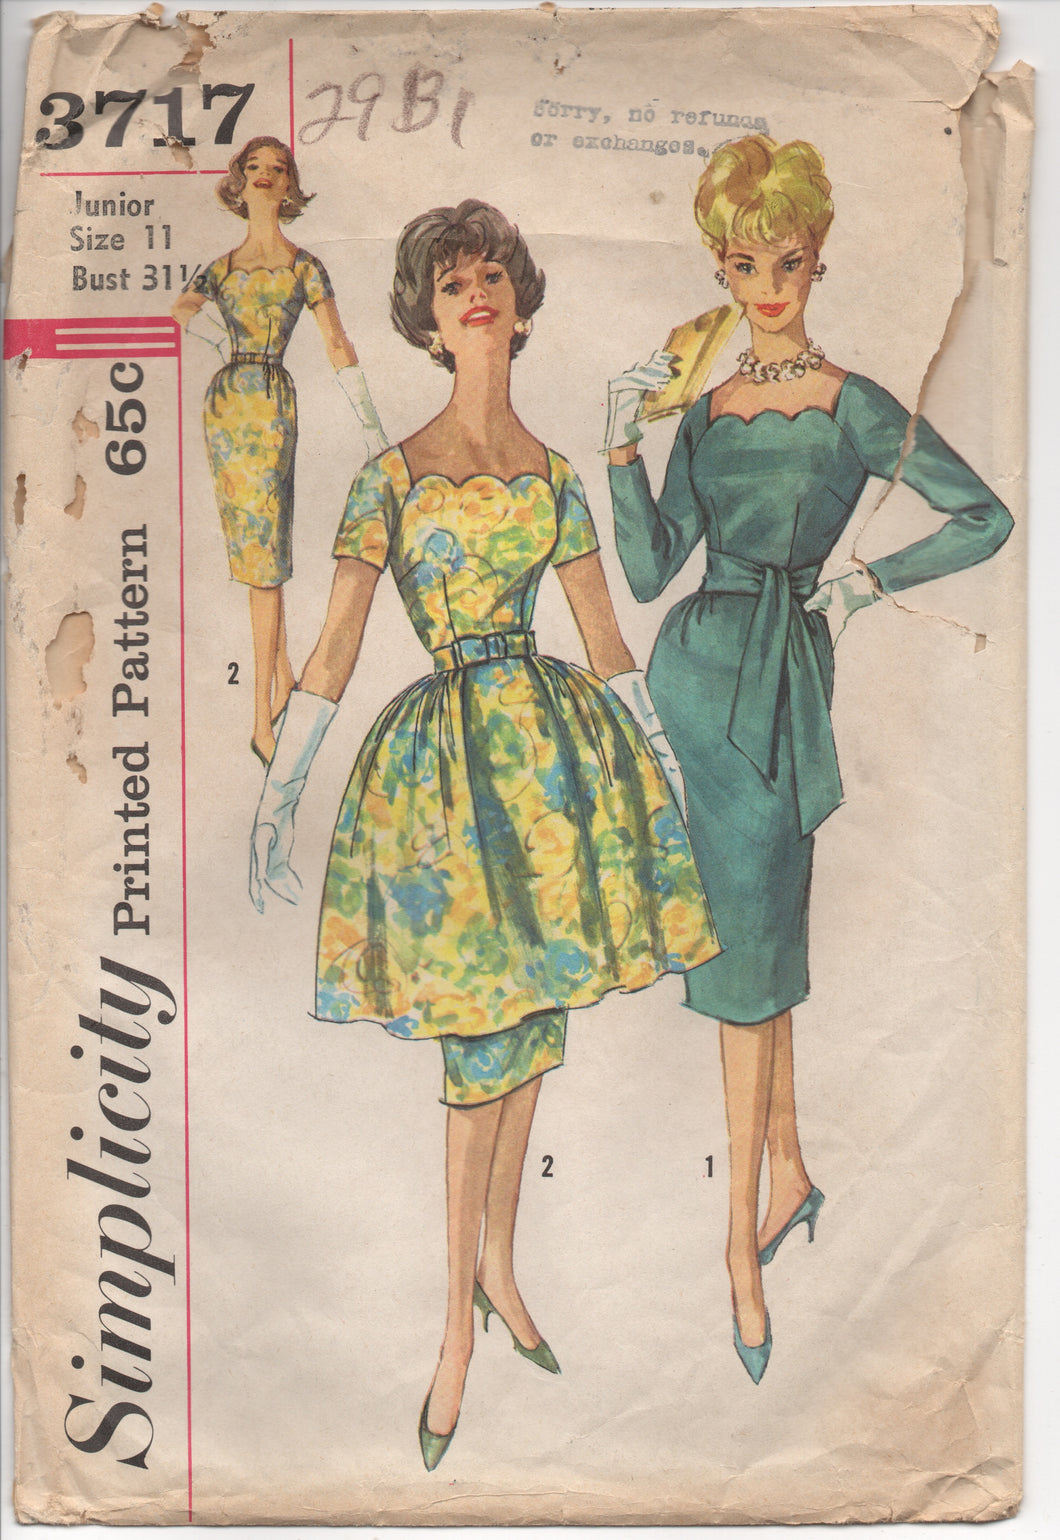 1960's Simplicity One Piece Sheath Dress with Scallops and Overskirt - Bust 31.5